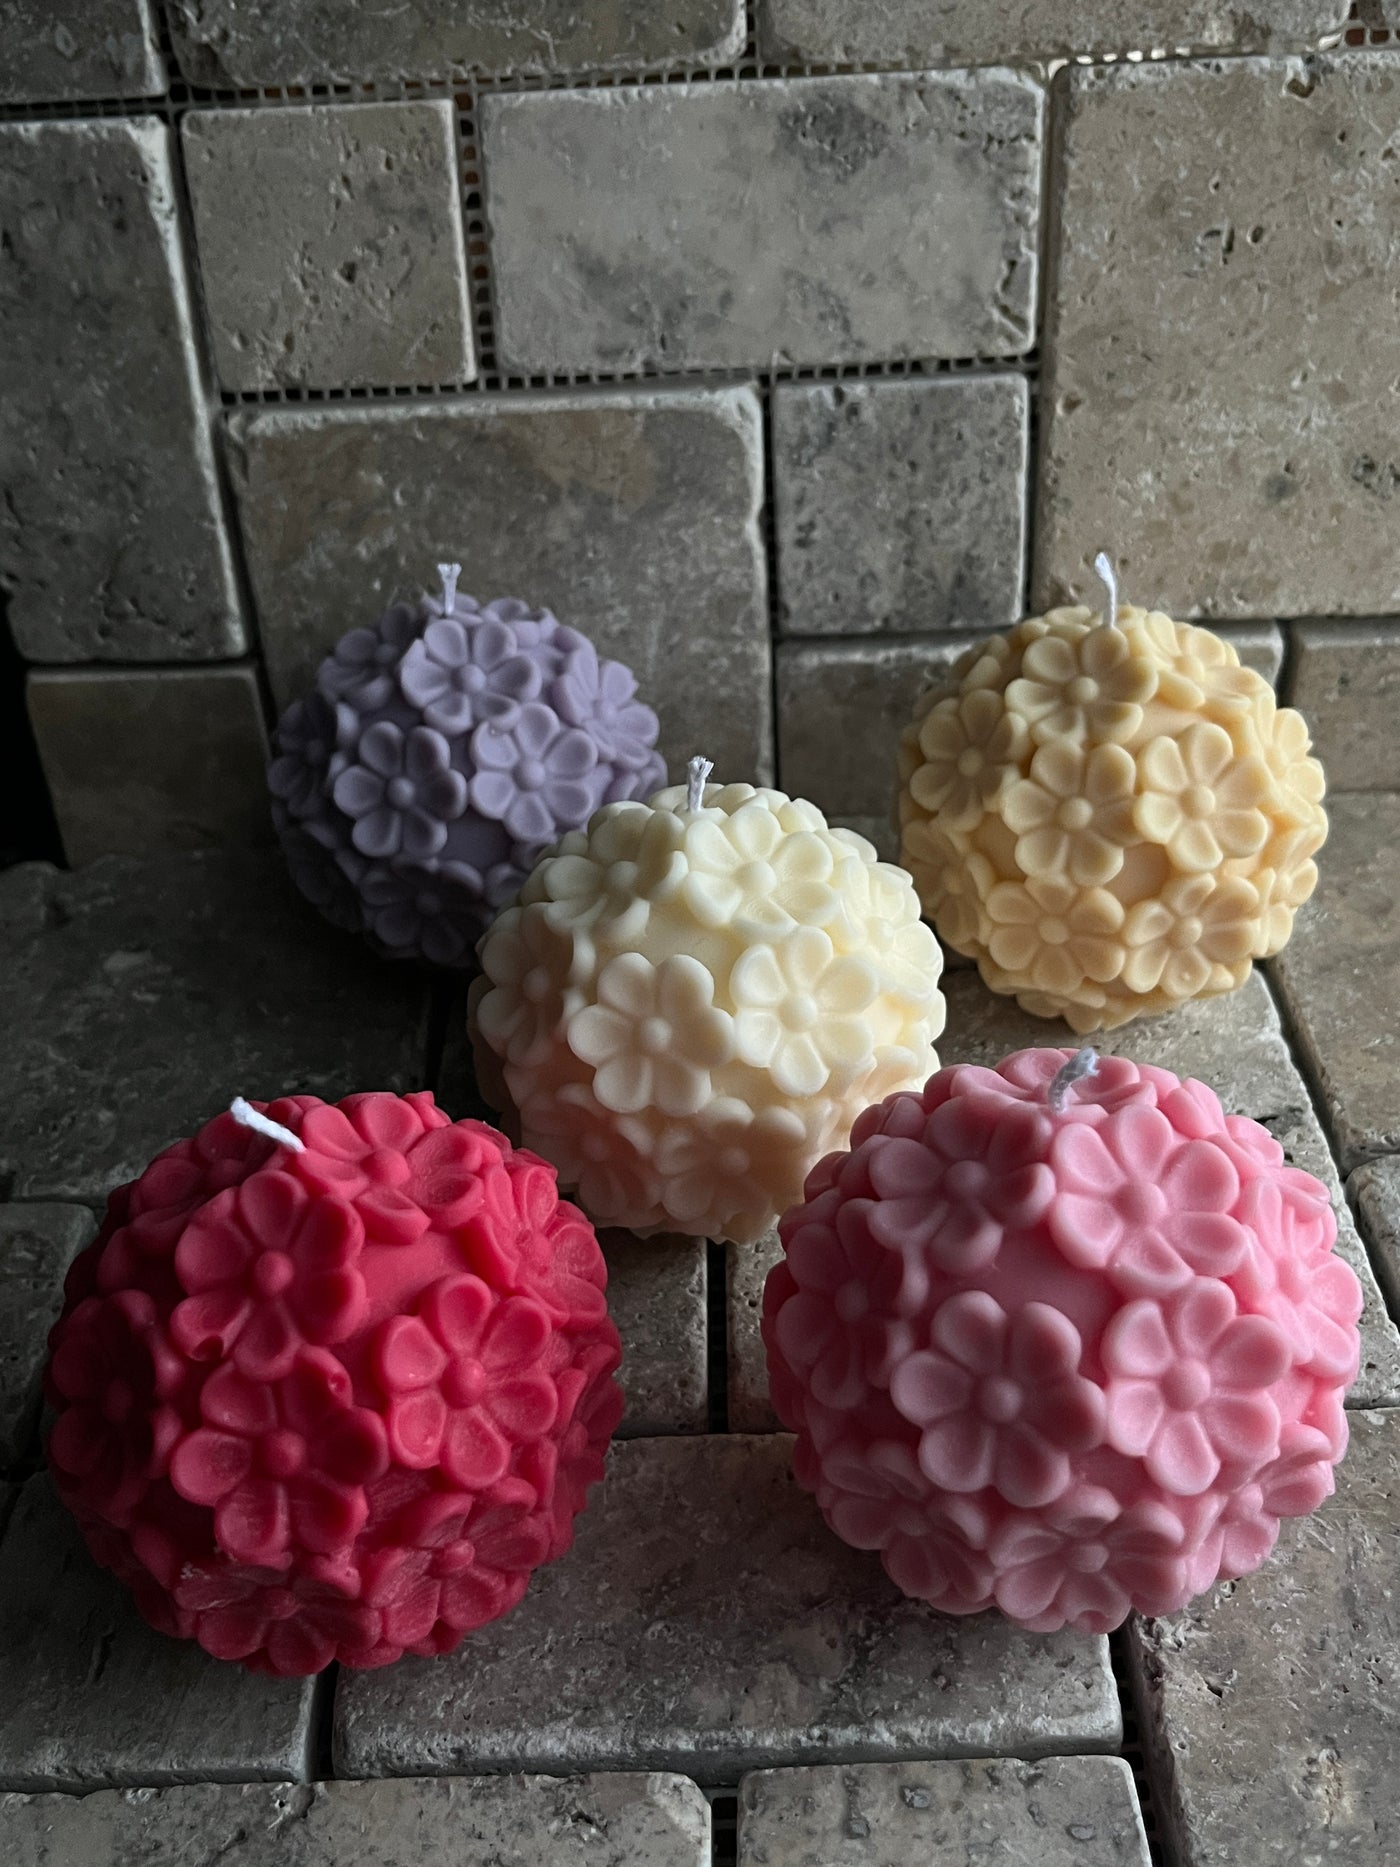 The Daisy Ball Flower Candle | Decorative Flowerball Candle | Mother's Day Candle